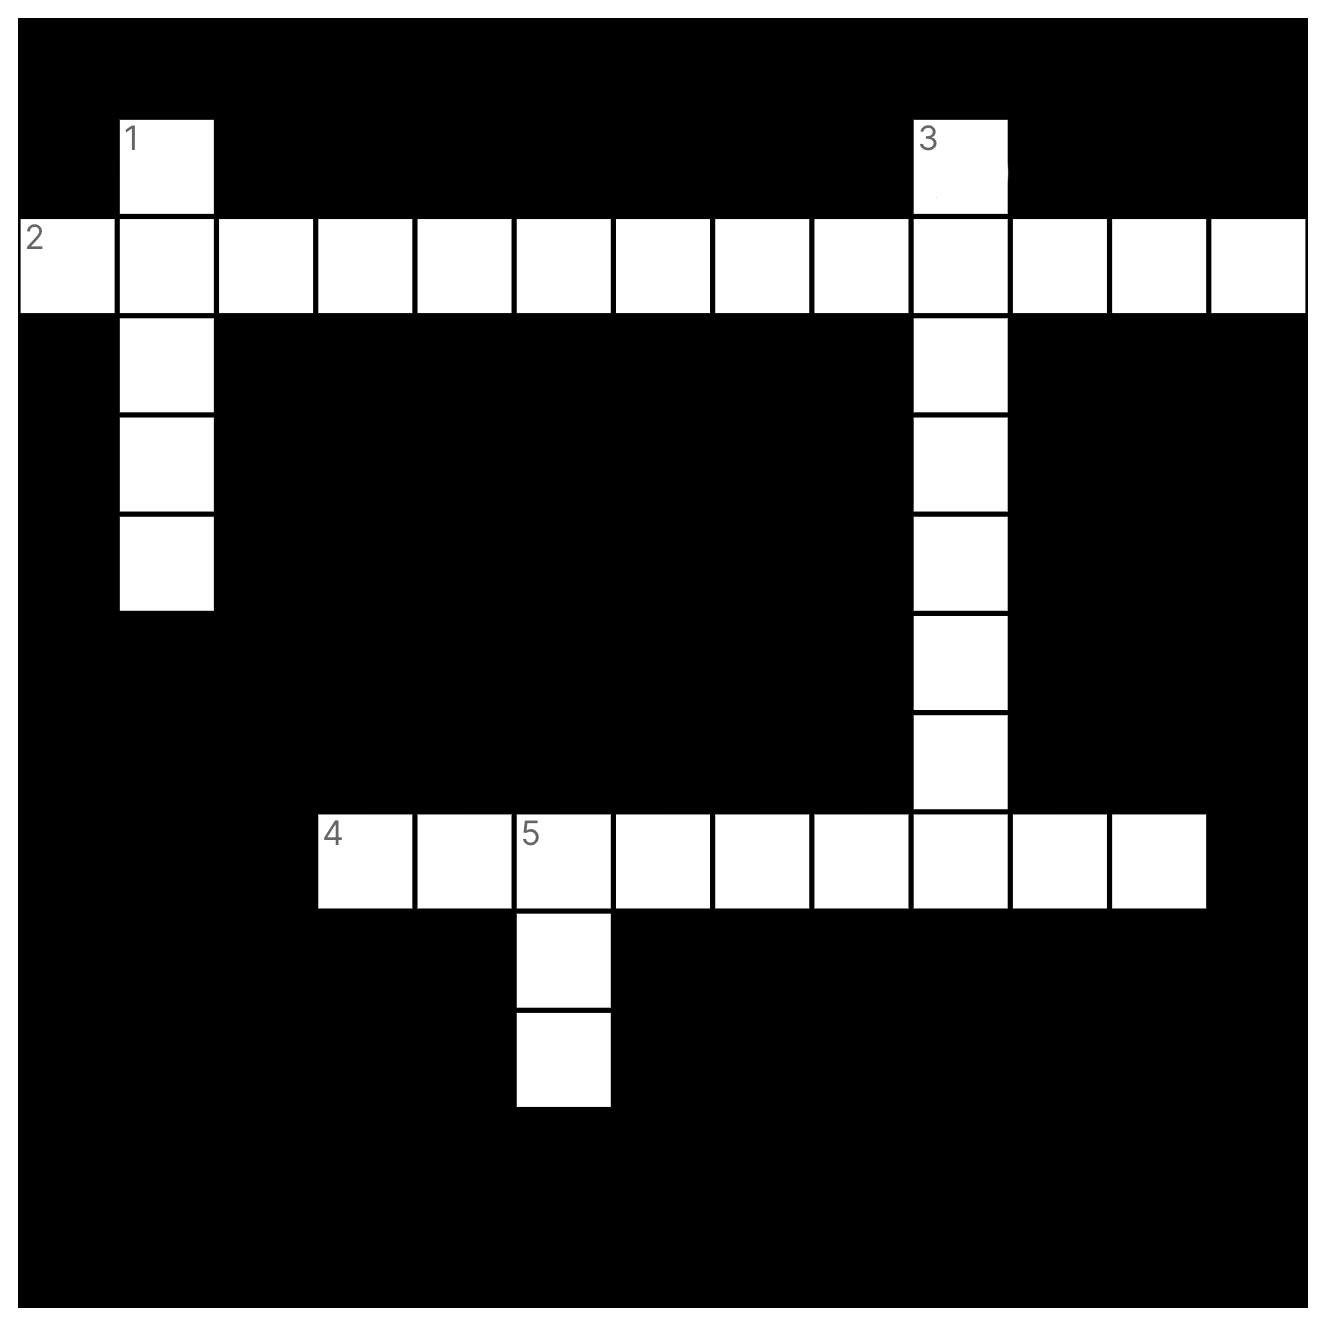 Blank crossword for chapter 2 of the crossword puzzle smart contract tutorial